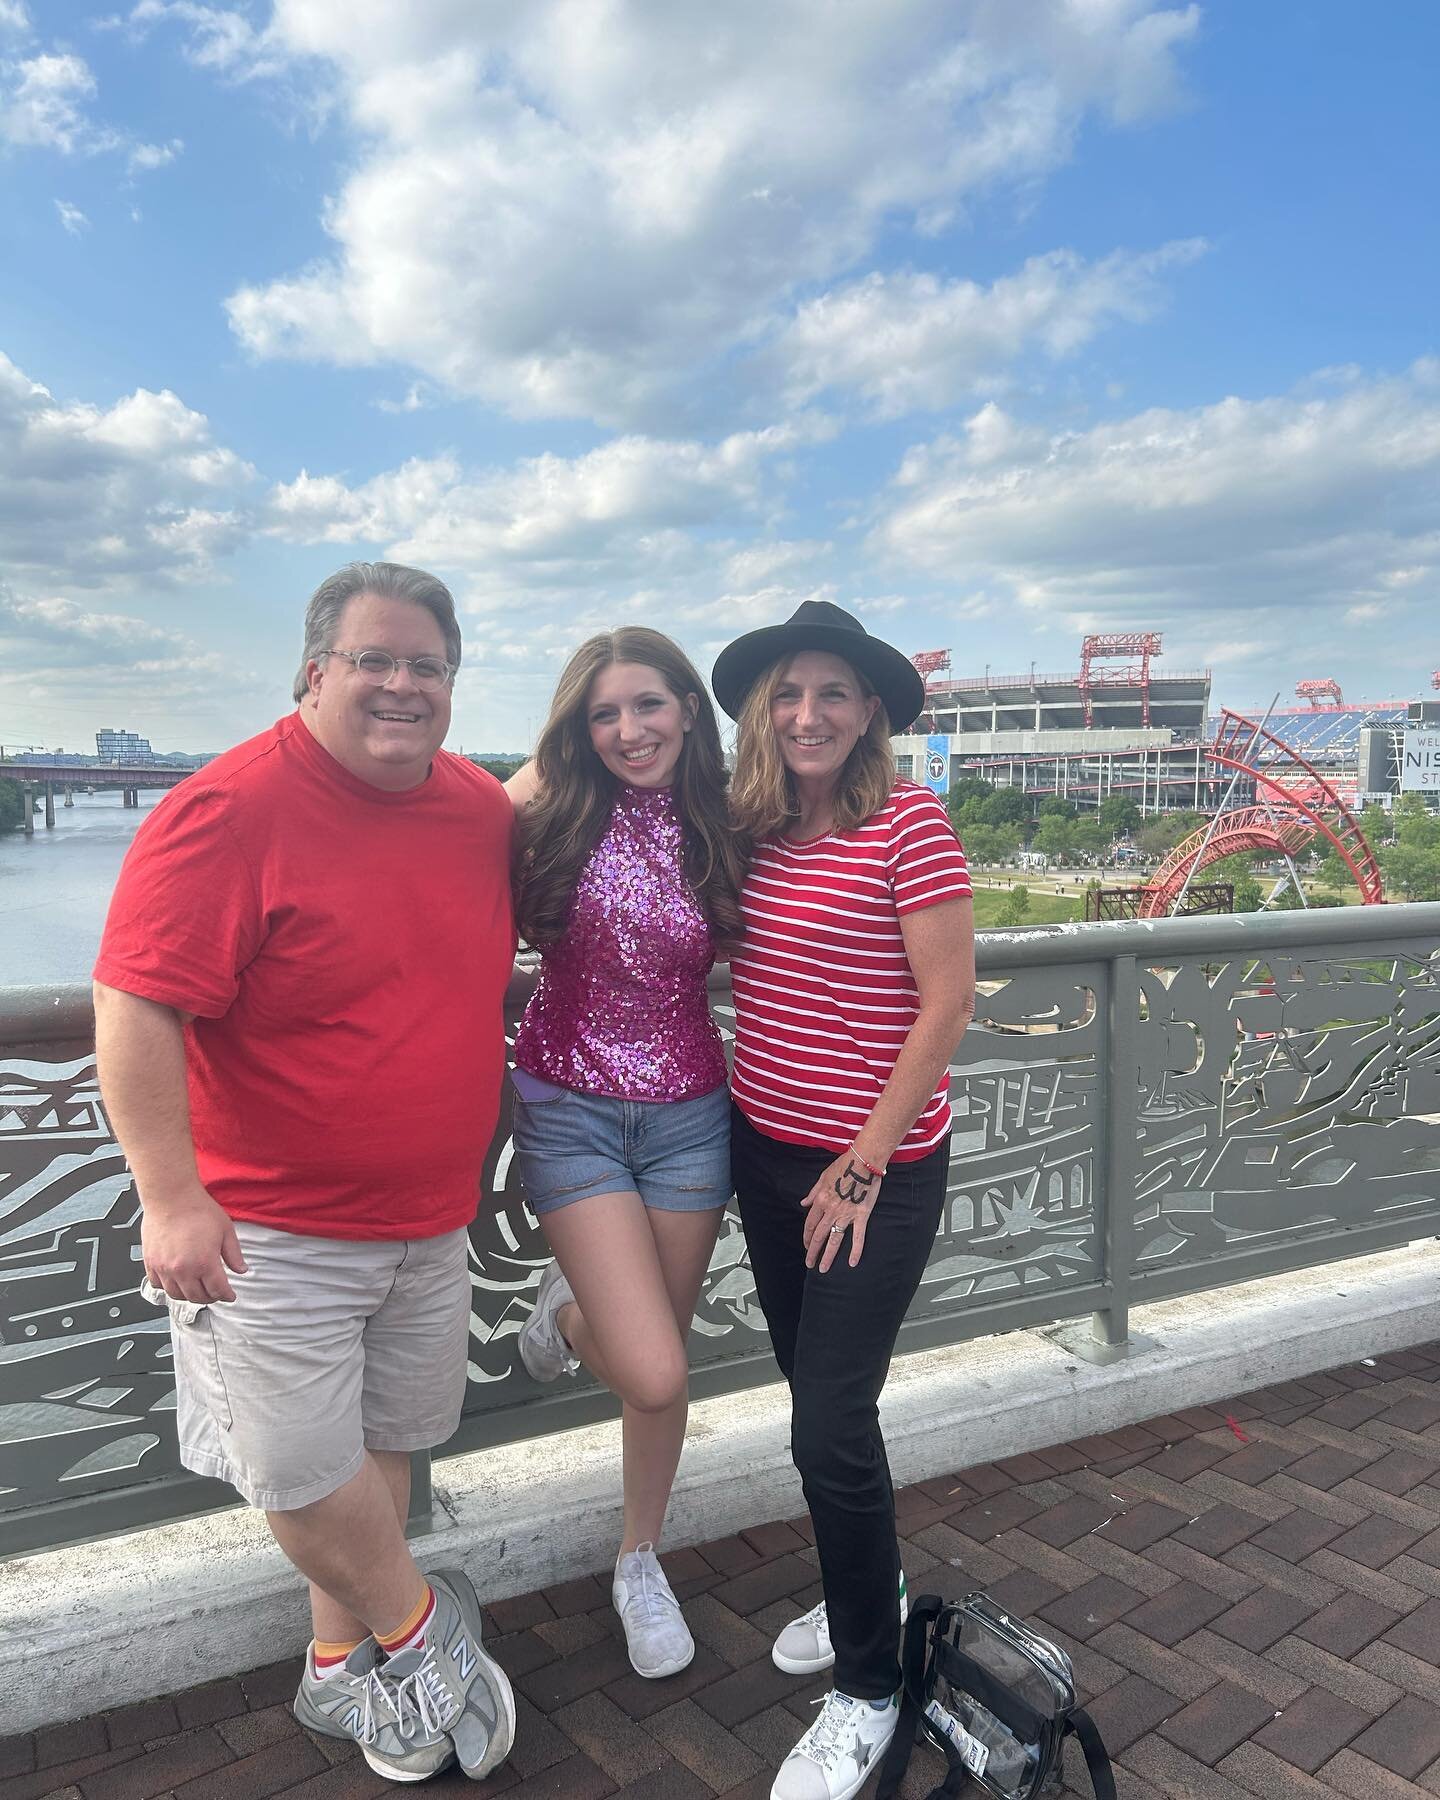 She&rsquo;s 16 and she&rsquo;s never been to a concert, any concert, ever. She has been asking for years to go see T. Swift - she is a huge Swiftie - she is so excited - looking forward to a great night with my sweet girl!